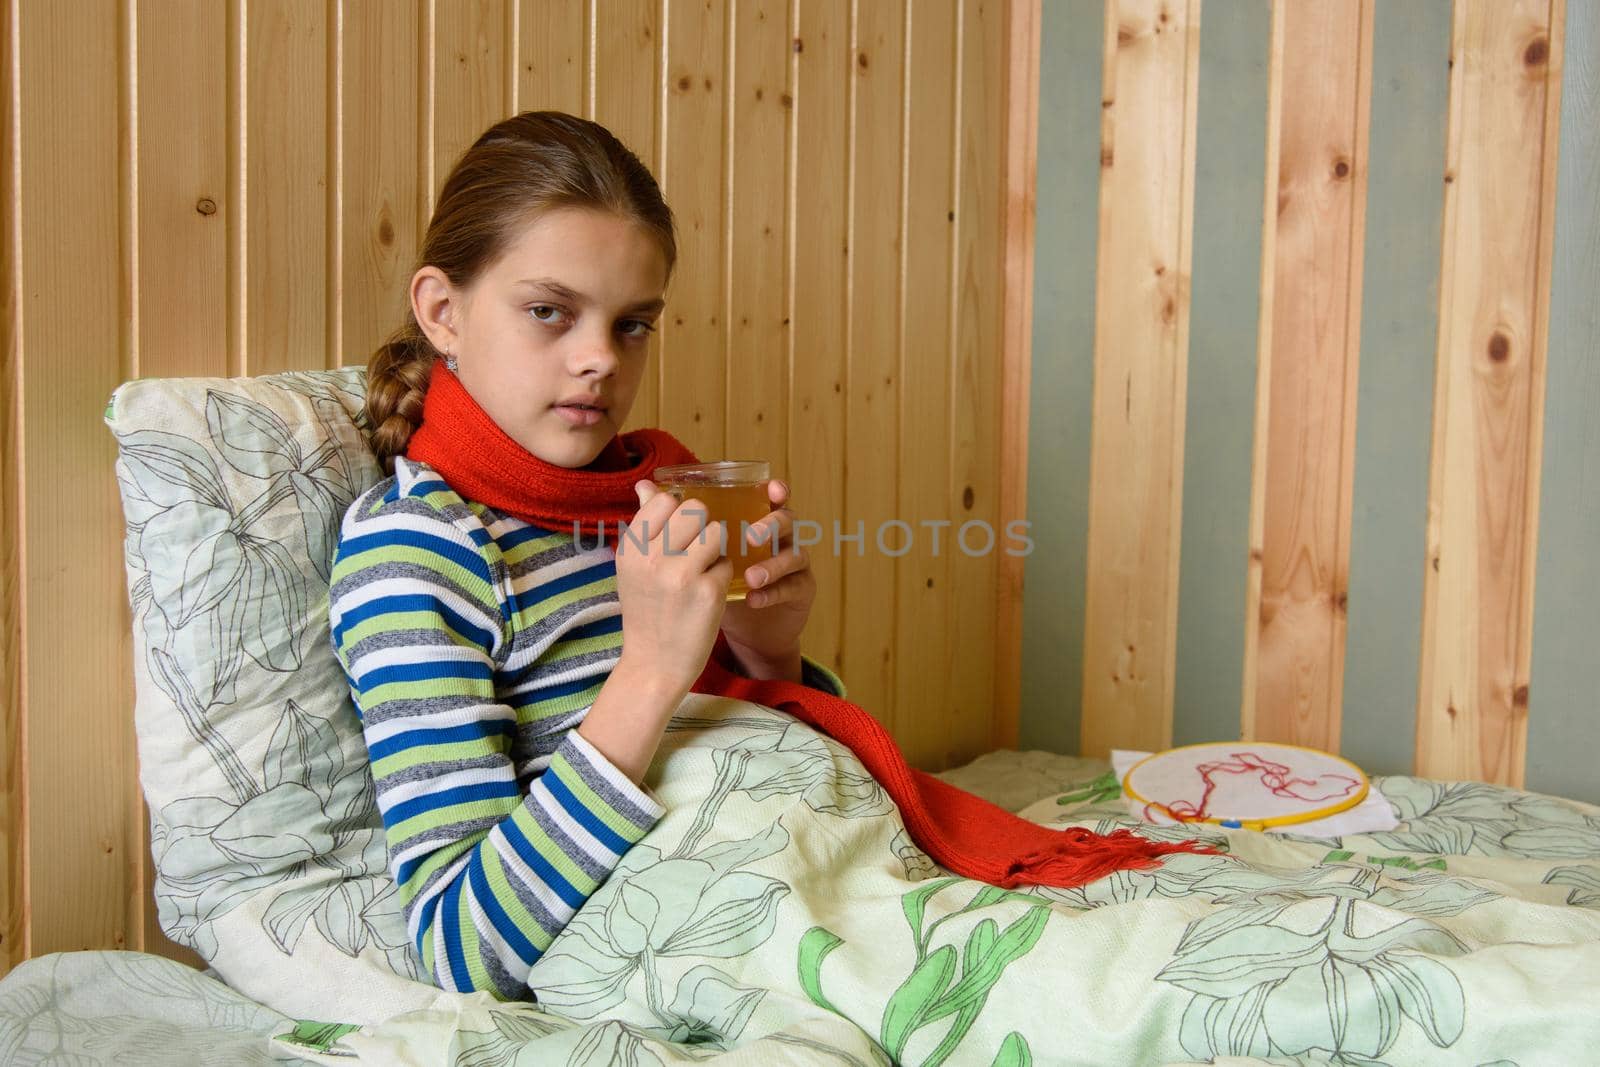 Sick girl drinking tea while sitting in bed, the girl looked into the frame